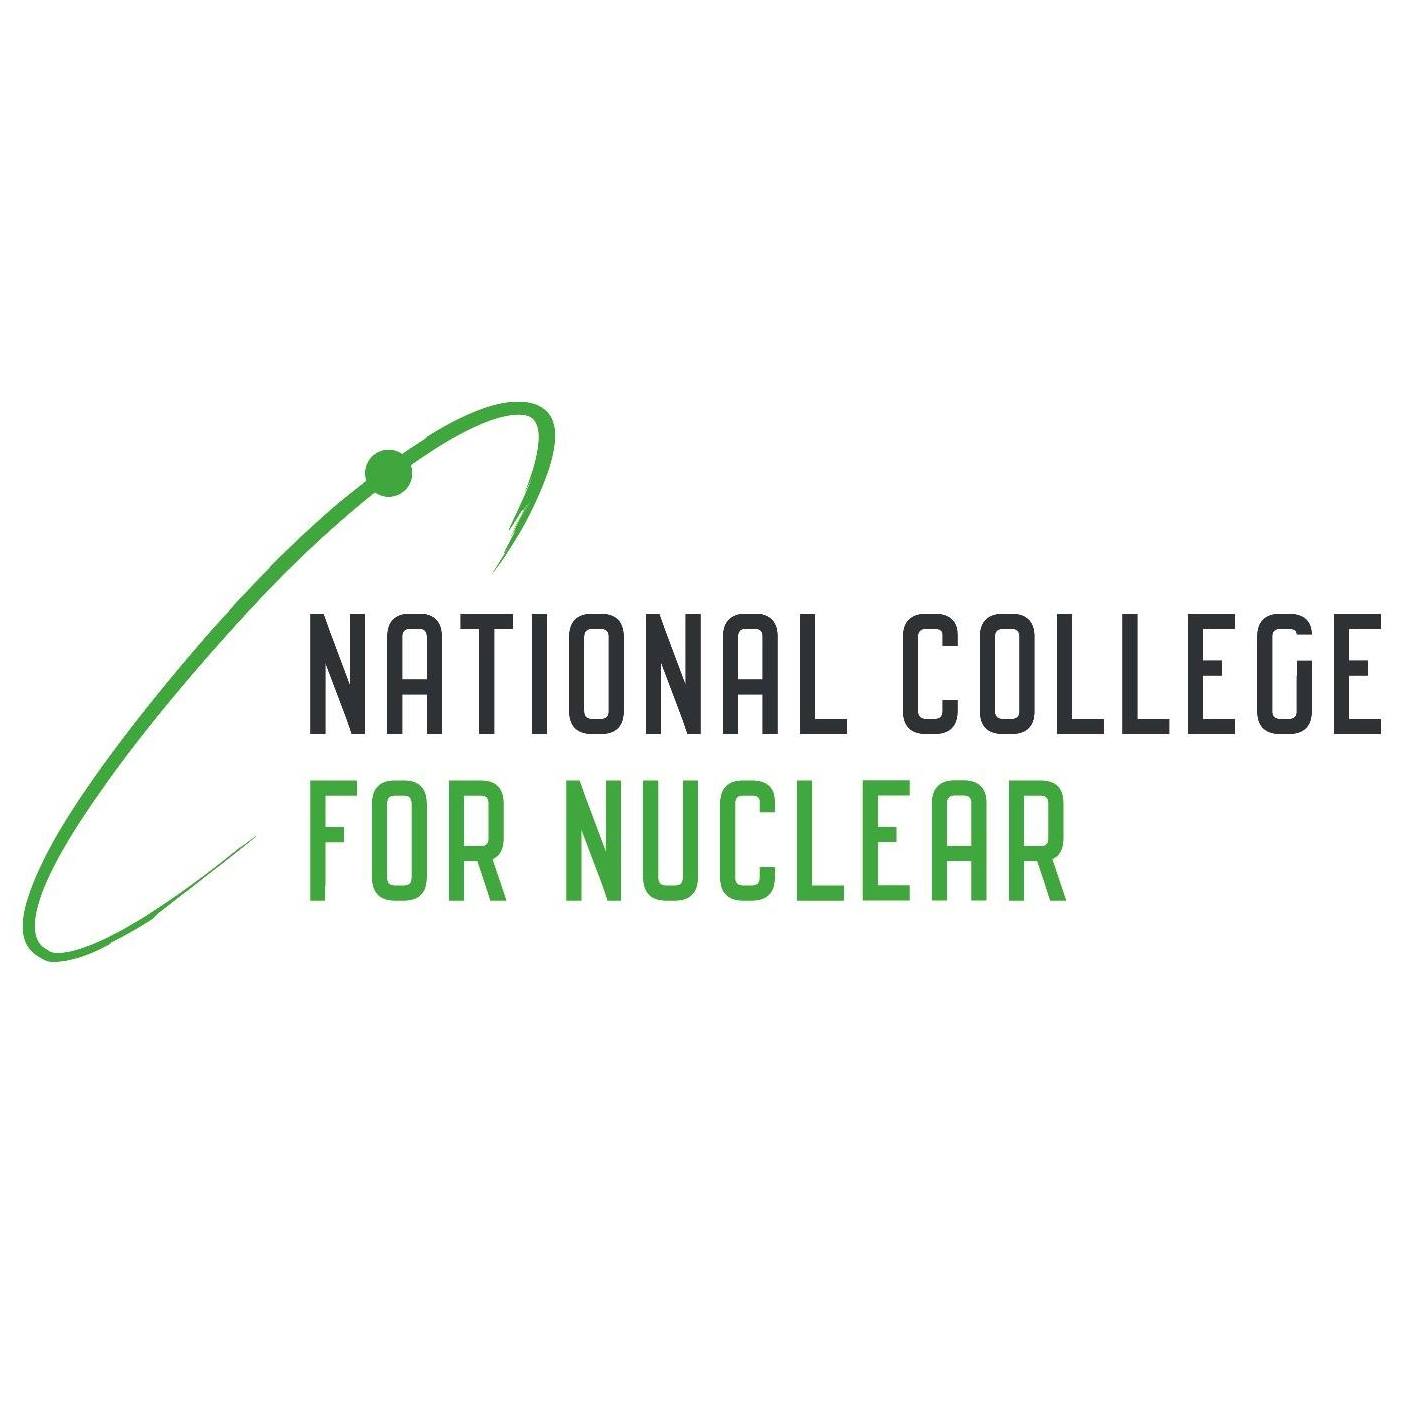 National College for Nuclear Facebook 2021